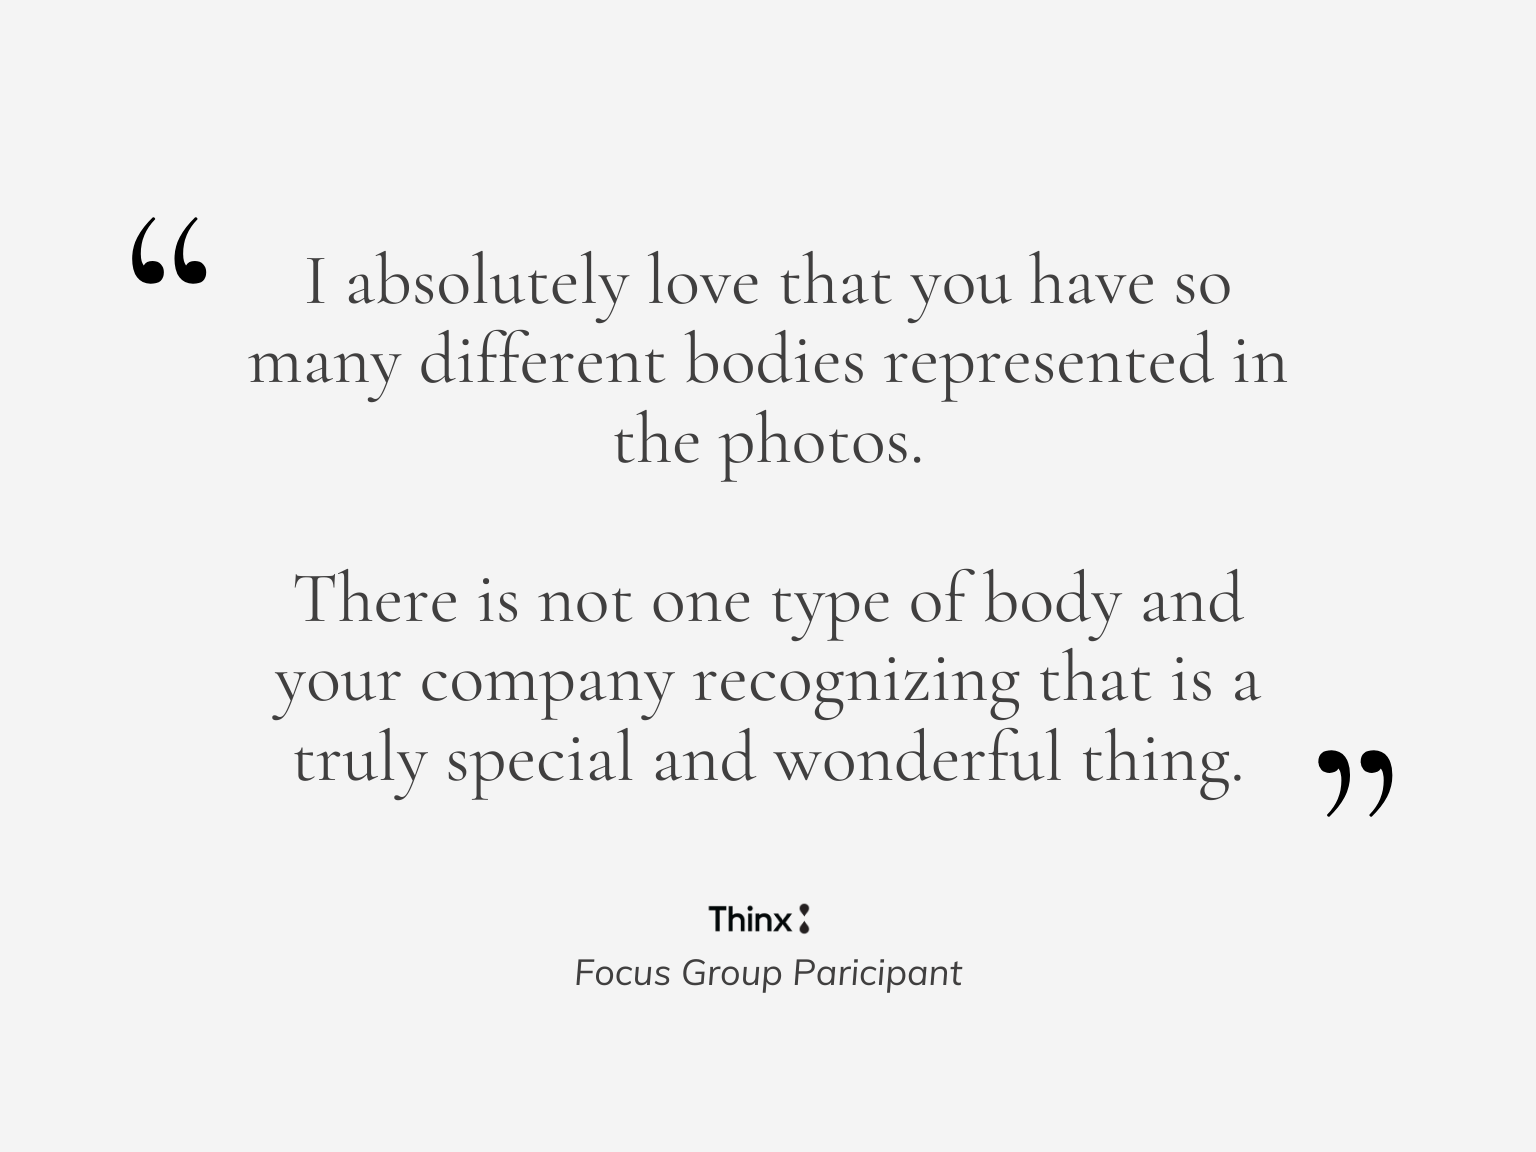 Positive feedback on diverse model casting from a focus group participant, praising the representation of different body types.